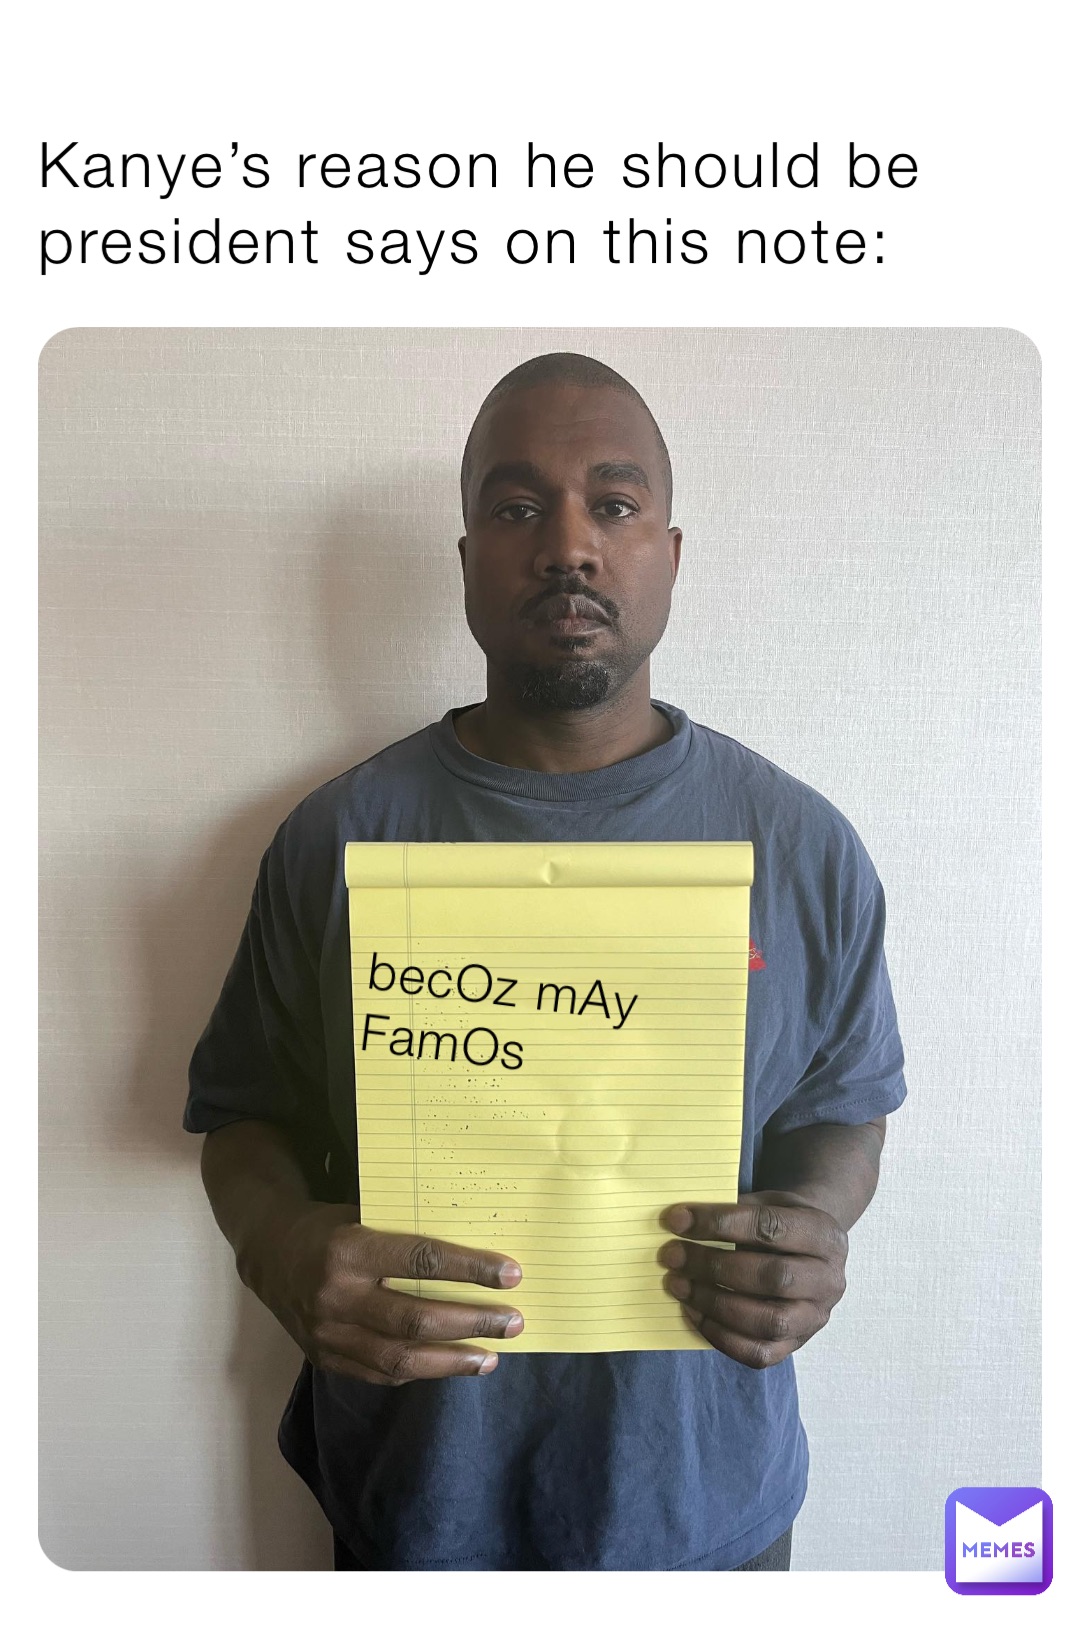 Kanye’s reason he should be president says on this note: becOz mAy FamOs